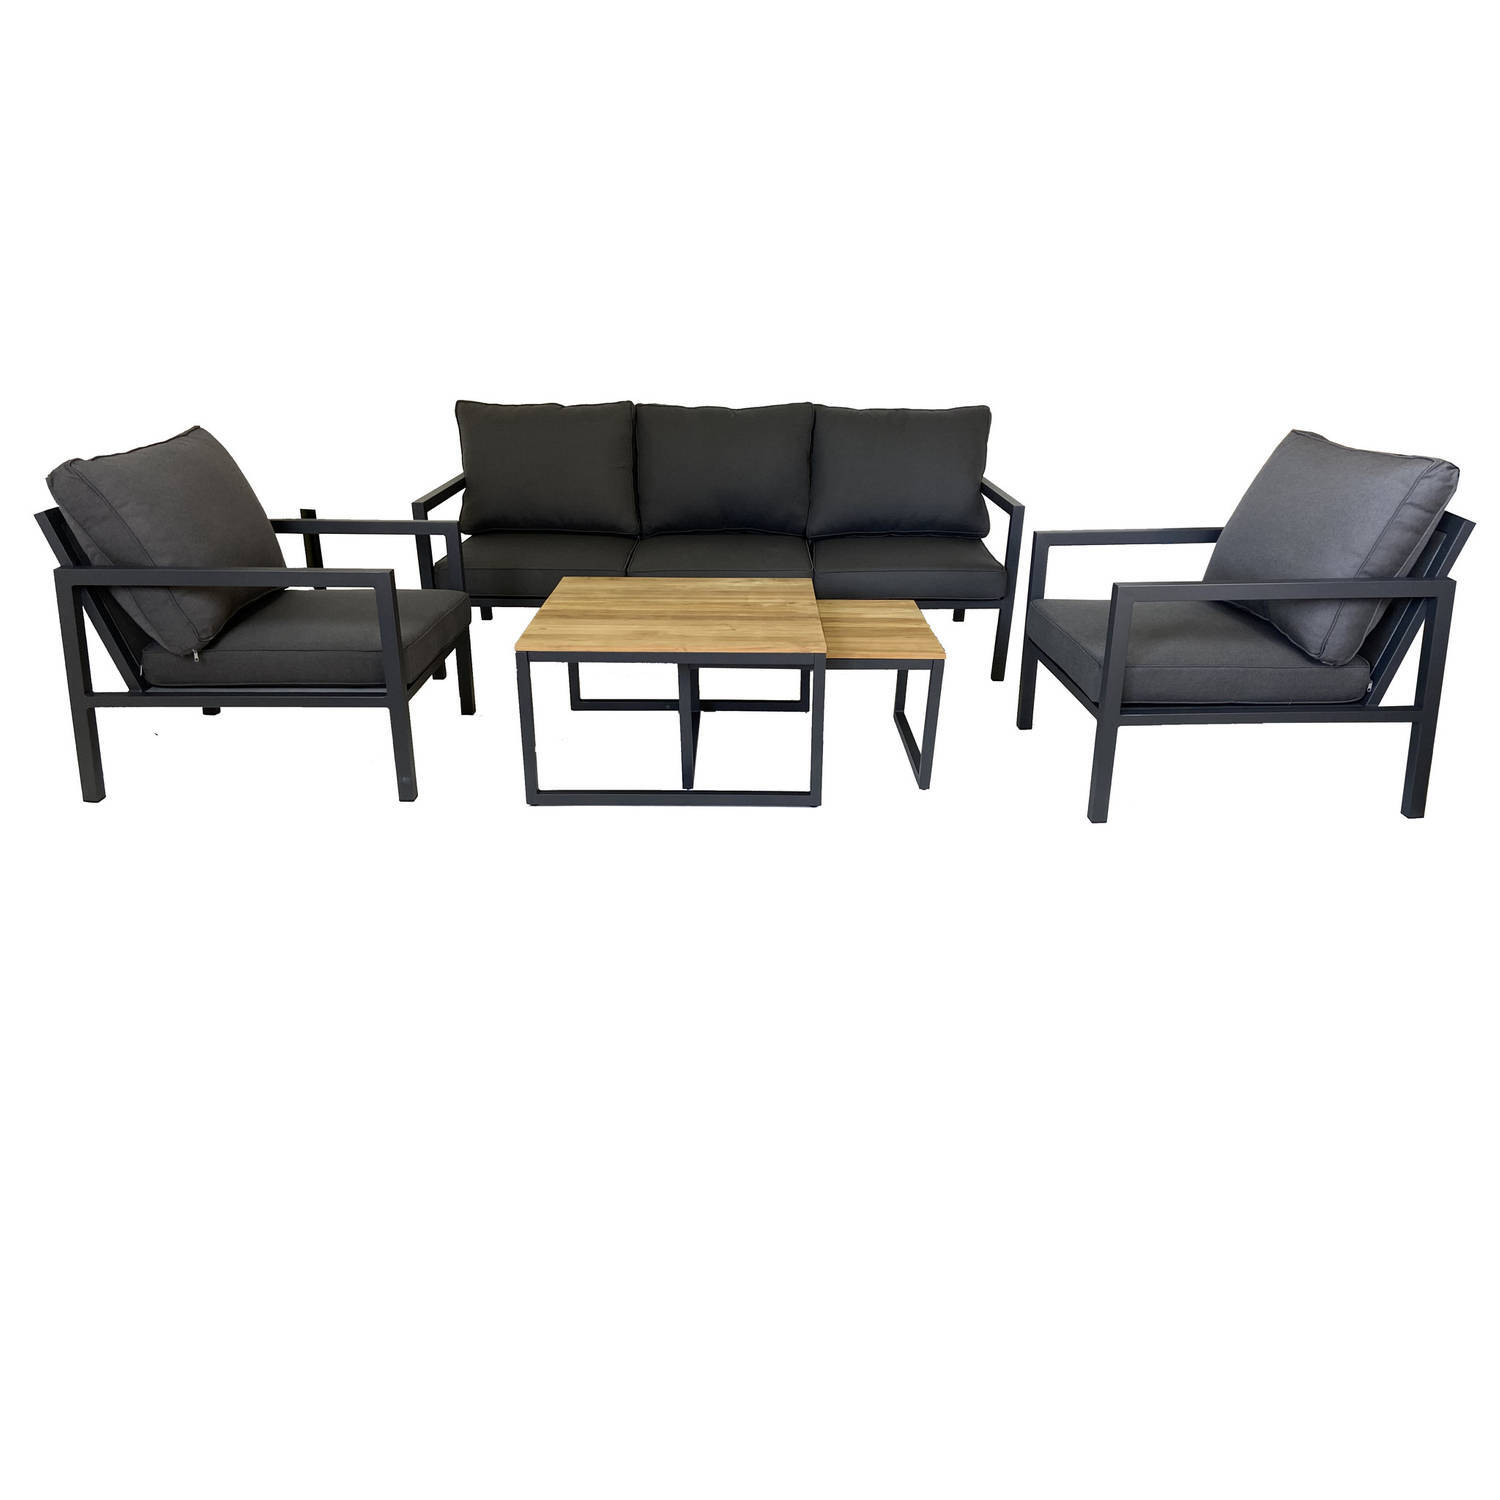 Mondial Living 5-persoons Sofaset Palazzo Incl. 2 kleine tafels